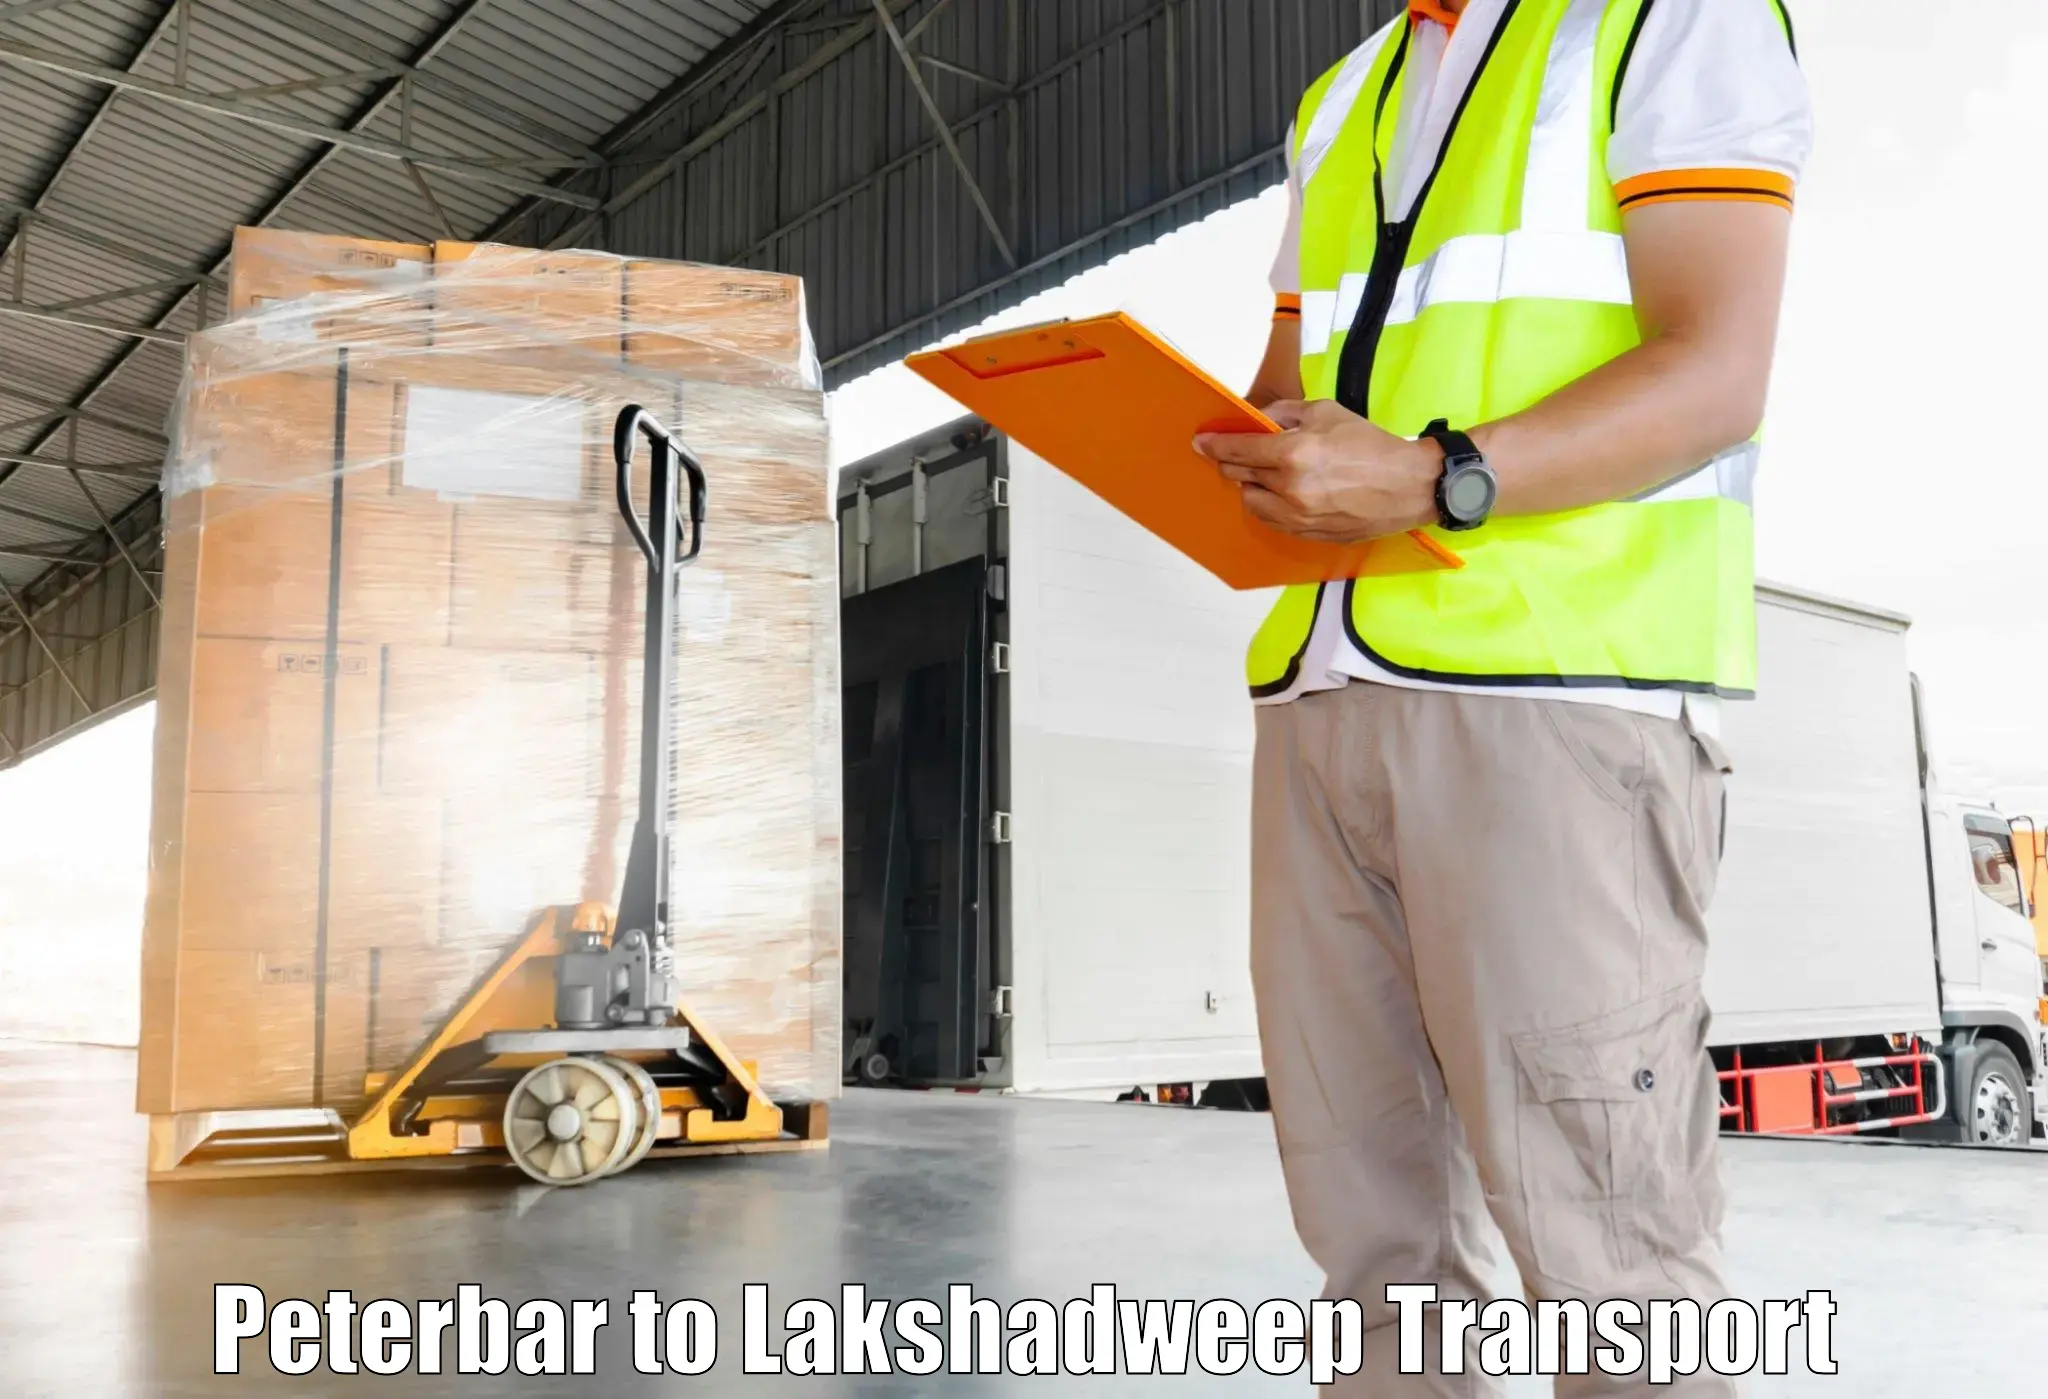 Nearby transport service in Peterbar to Lakshadweep